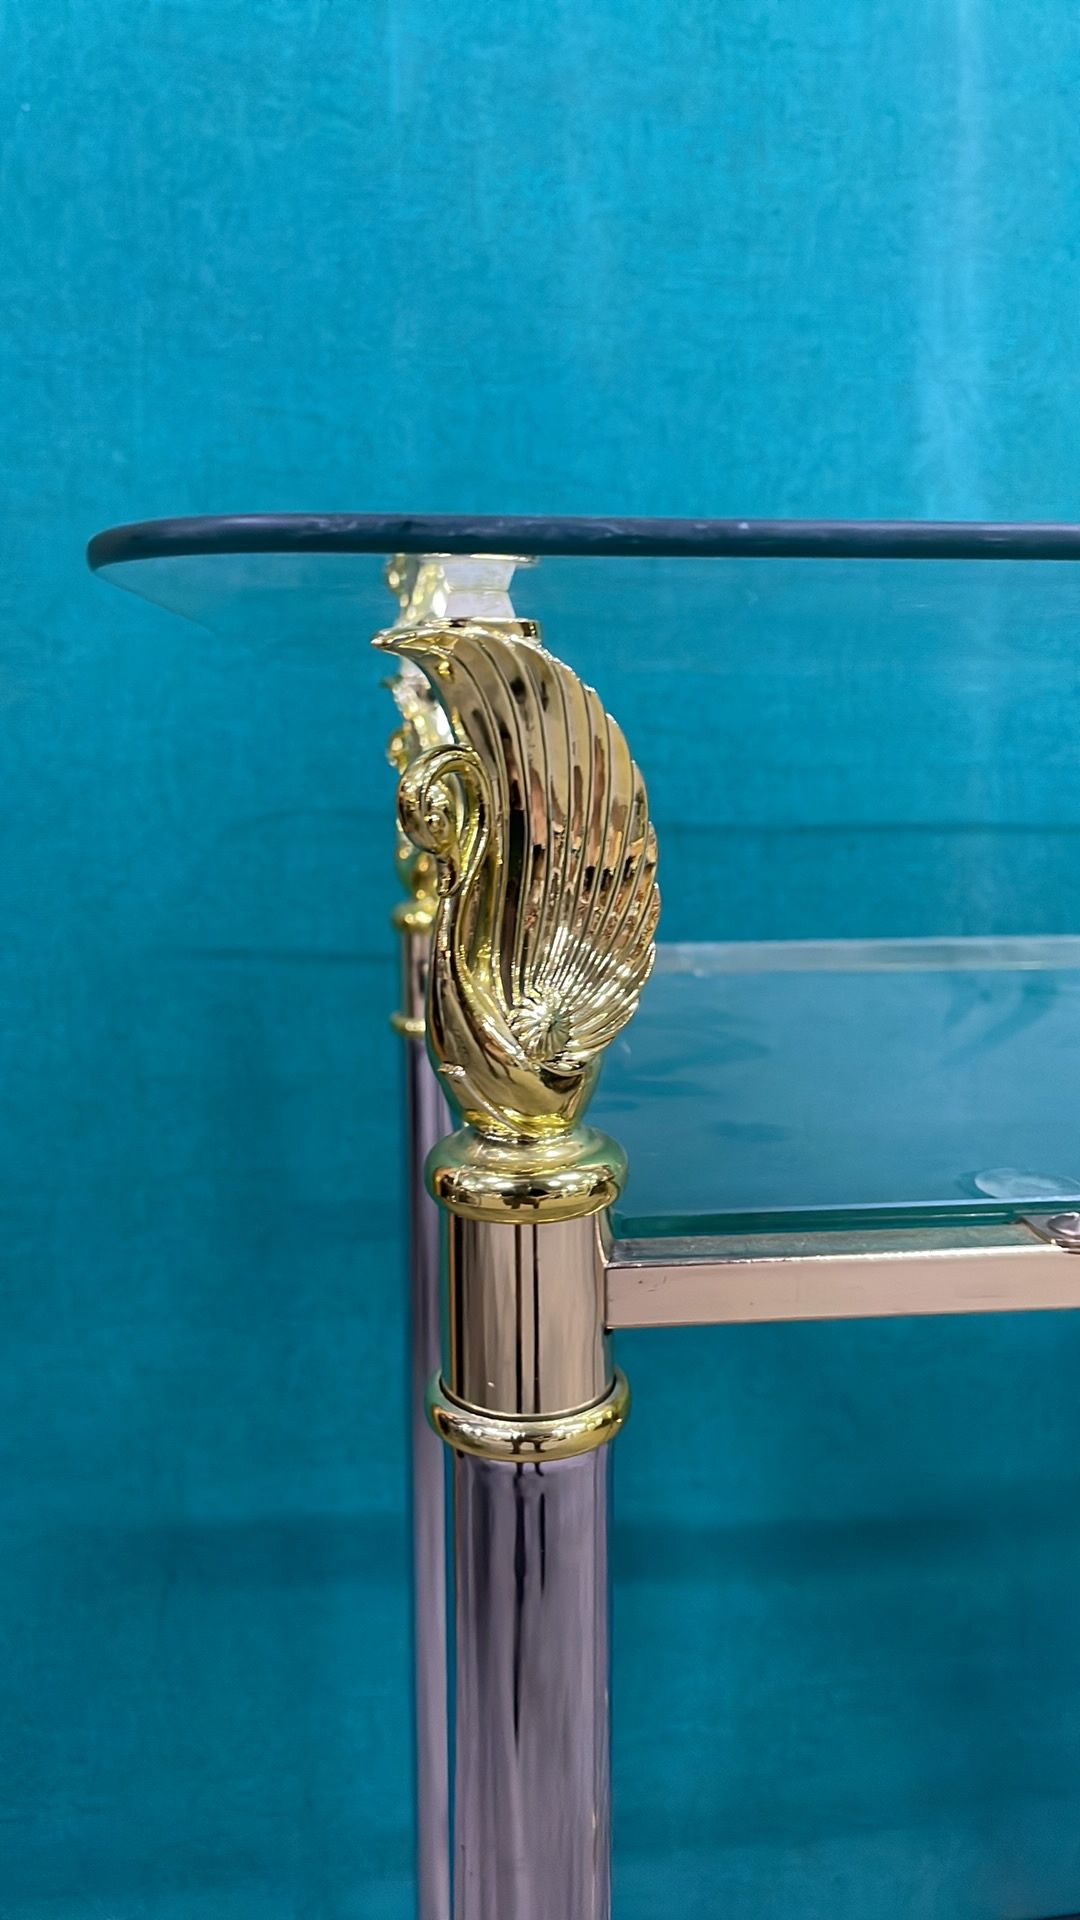 Elegant Glass Side Table with Decorative Swans - Image 2 of 4